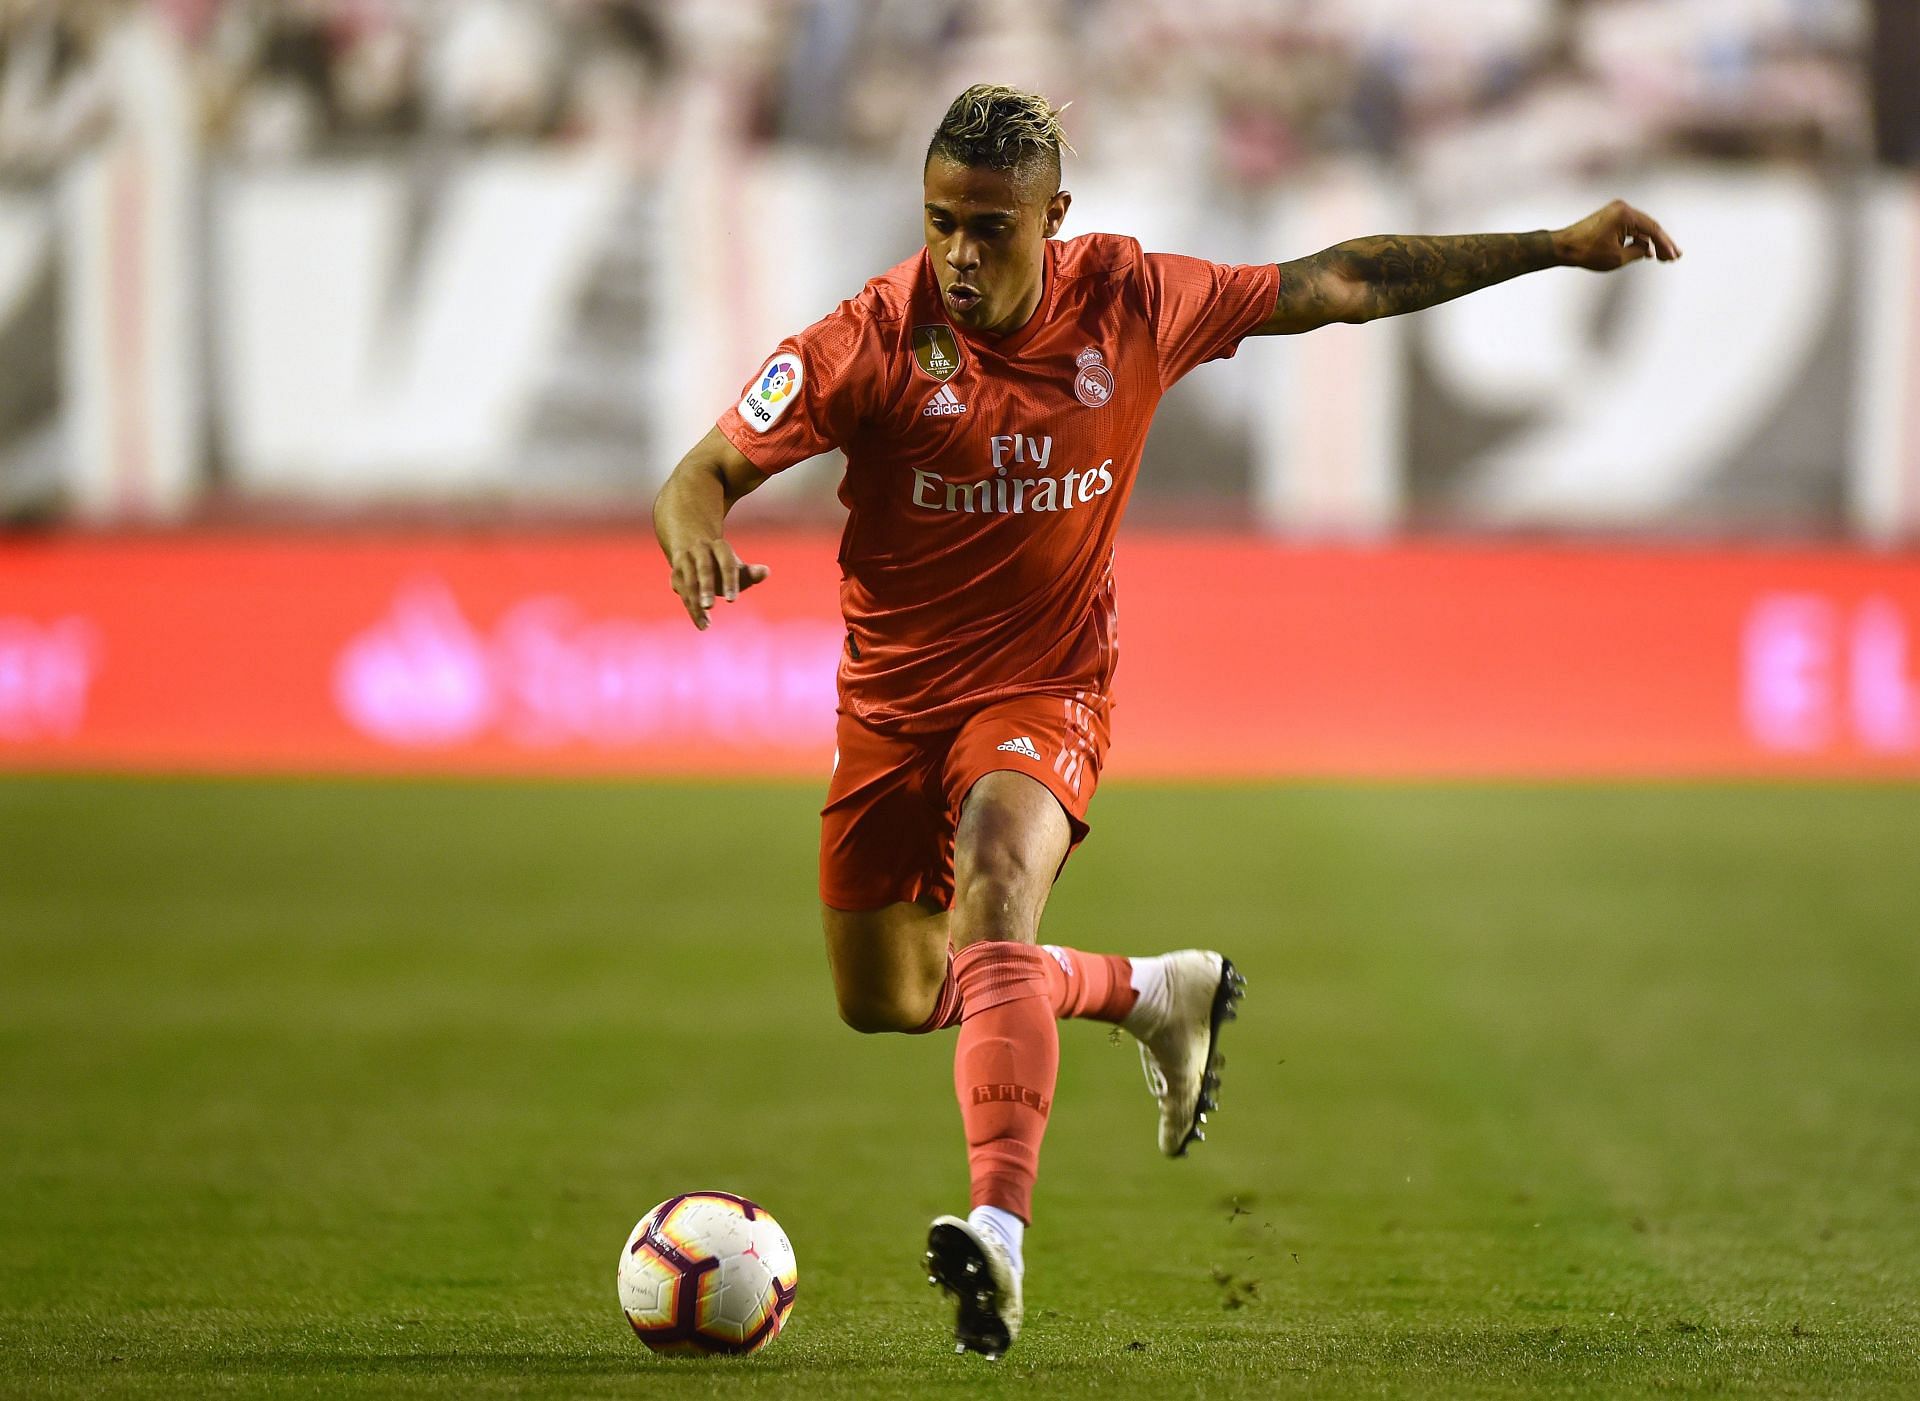 Mariano Diaz will not leave the Santiago Bernabeu this summer.